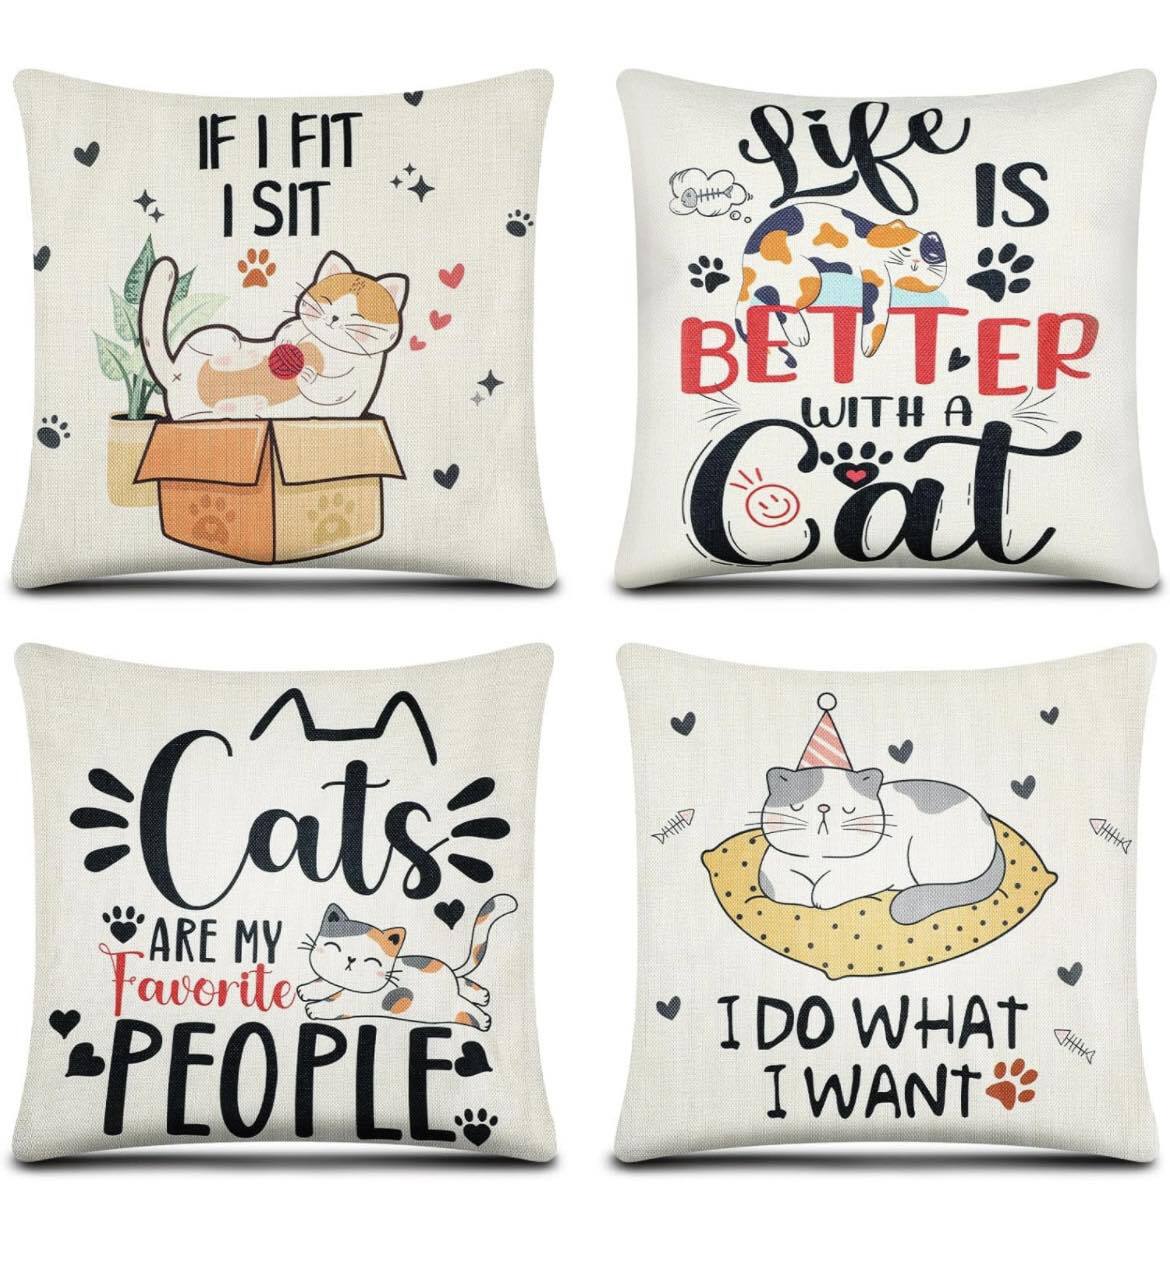 Cat-Inspired Decorative Pillows